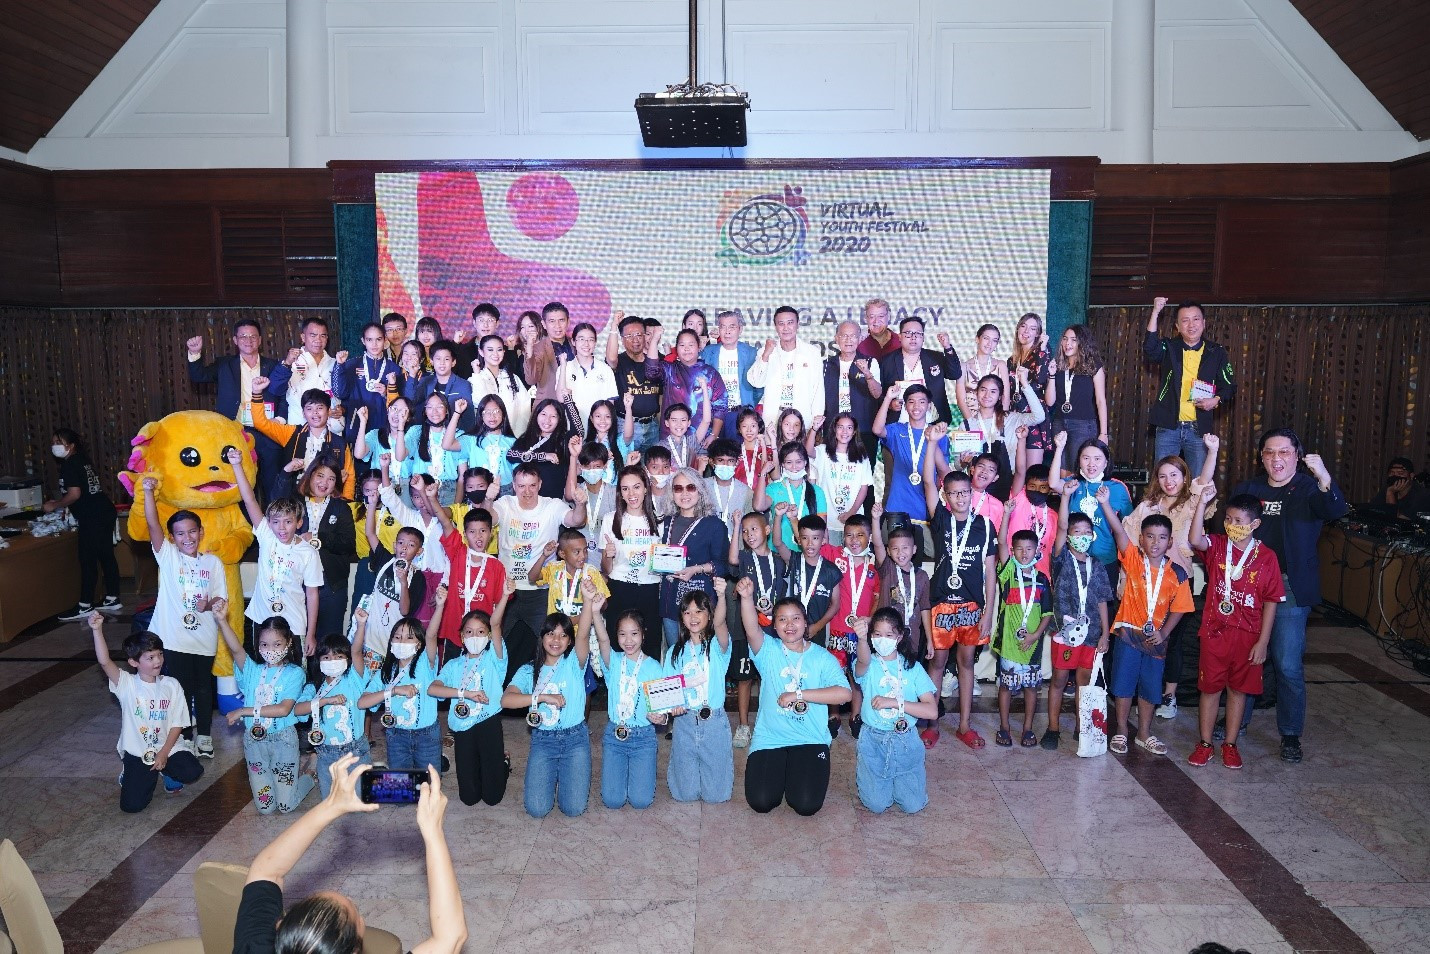 UTS held the festival and gala remotely due to the COVID-19 pandemic, with some youngsters from Thailand coming together ©UTS